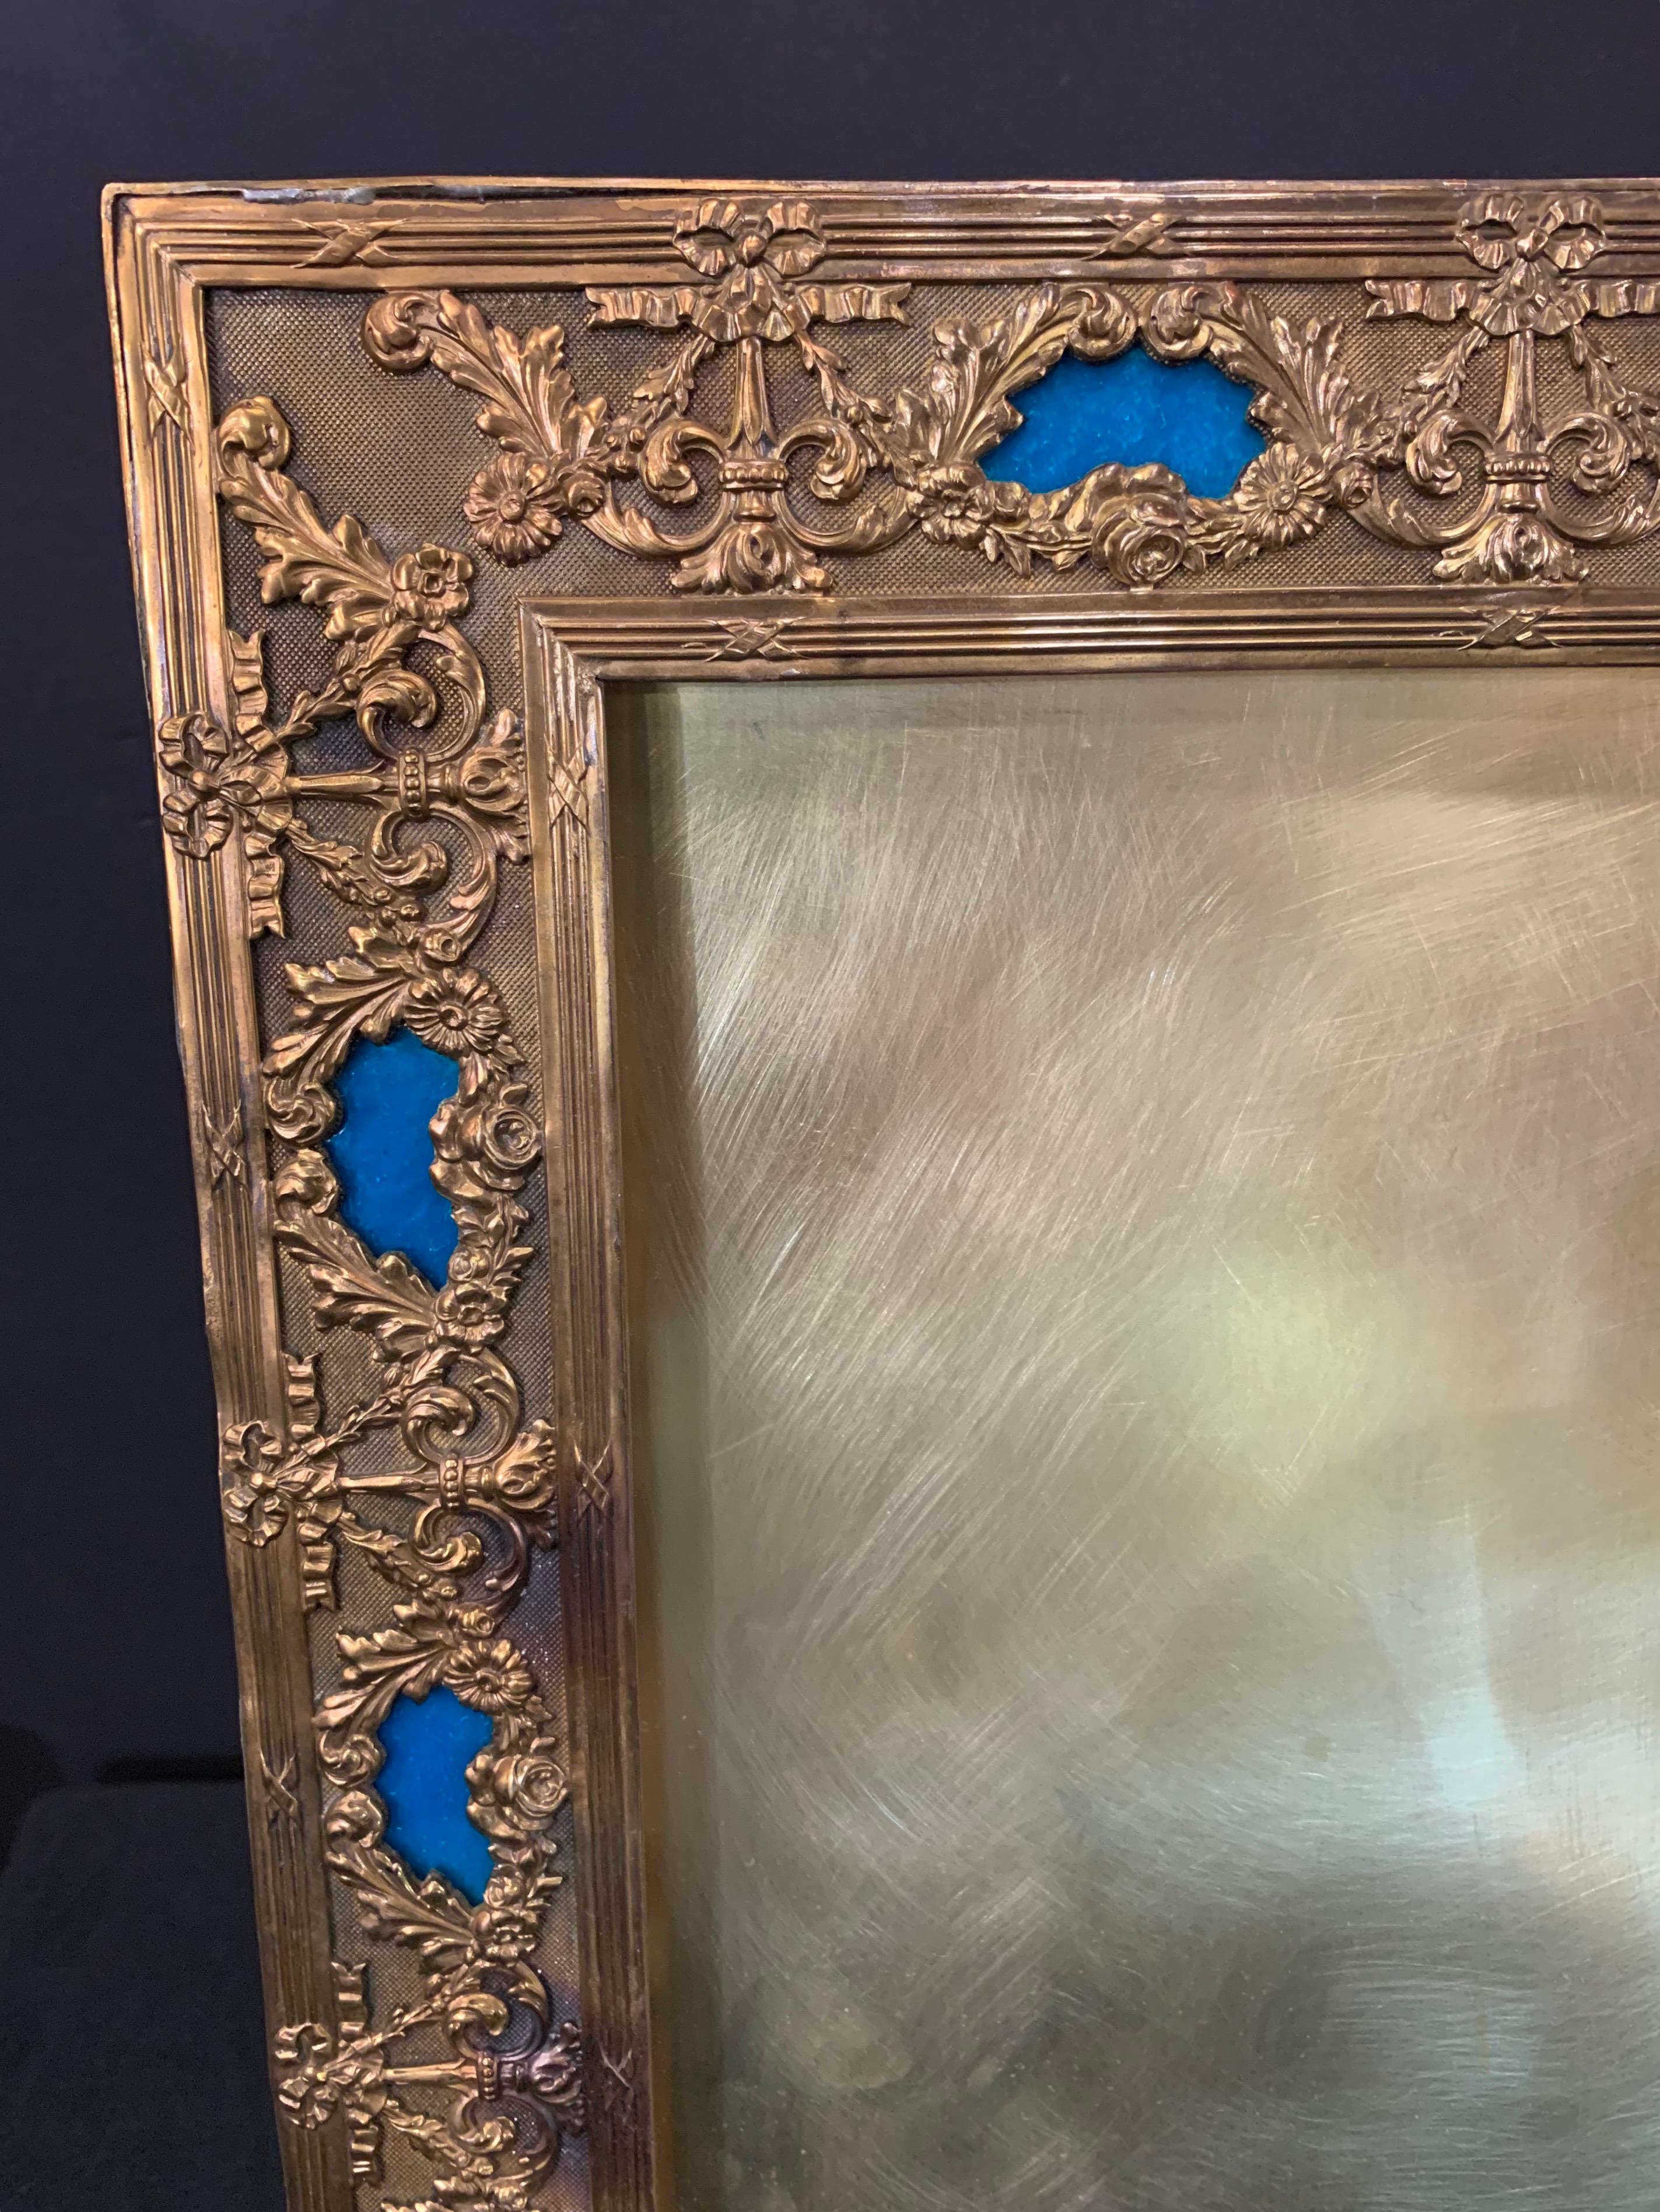 A wonderful french large blue enamel inset and bronze picture frame with bows and swags.
Measures: 18